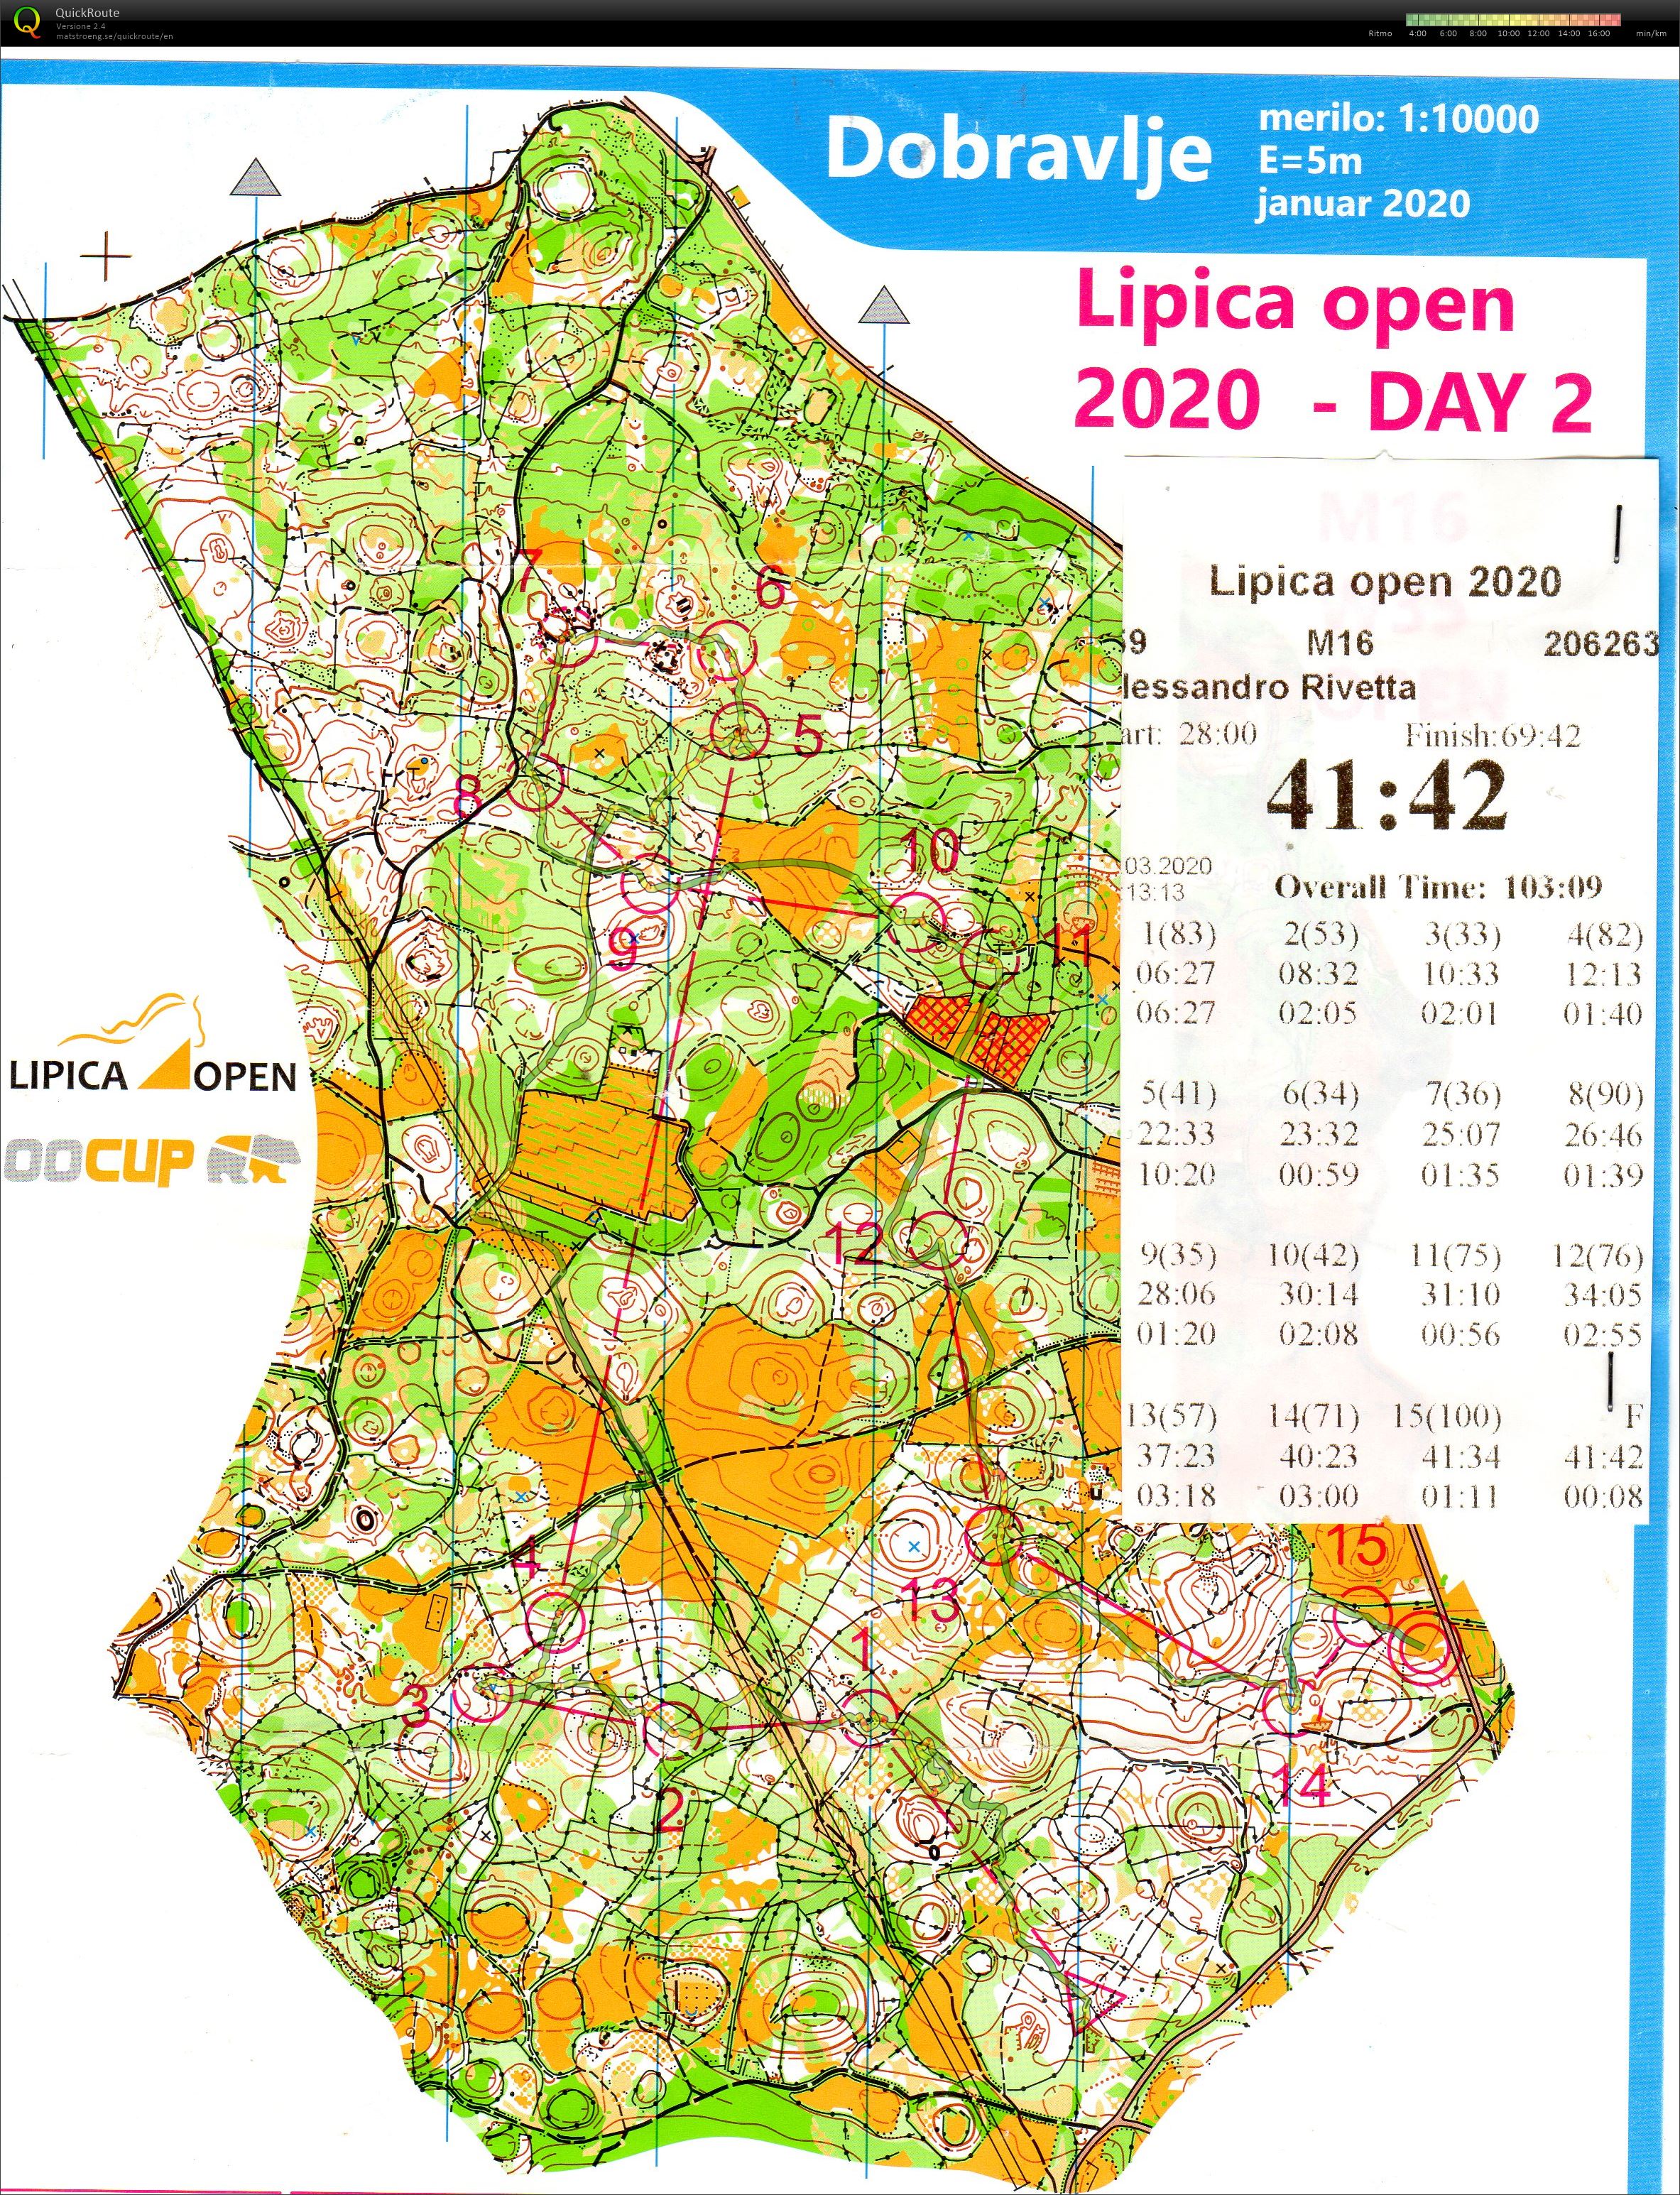 Lipica Open - Day 2 (08.03.2020)